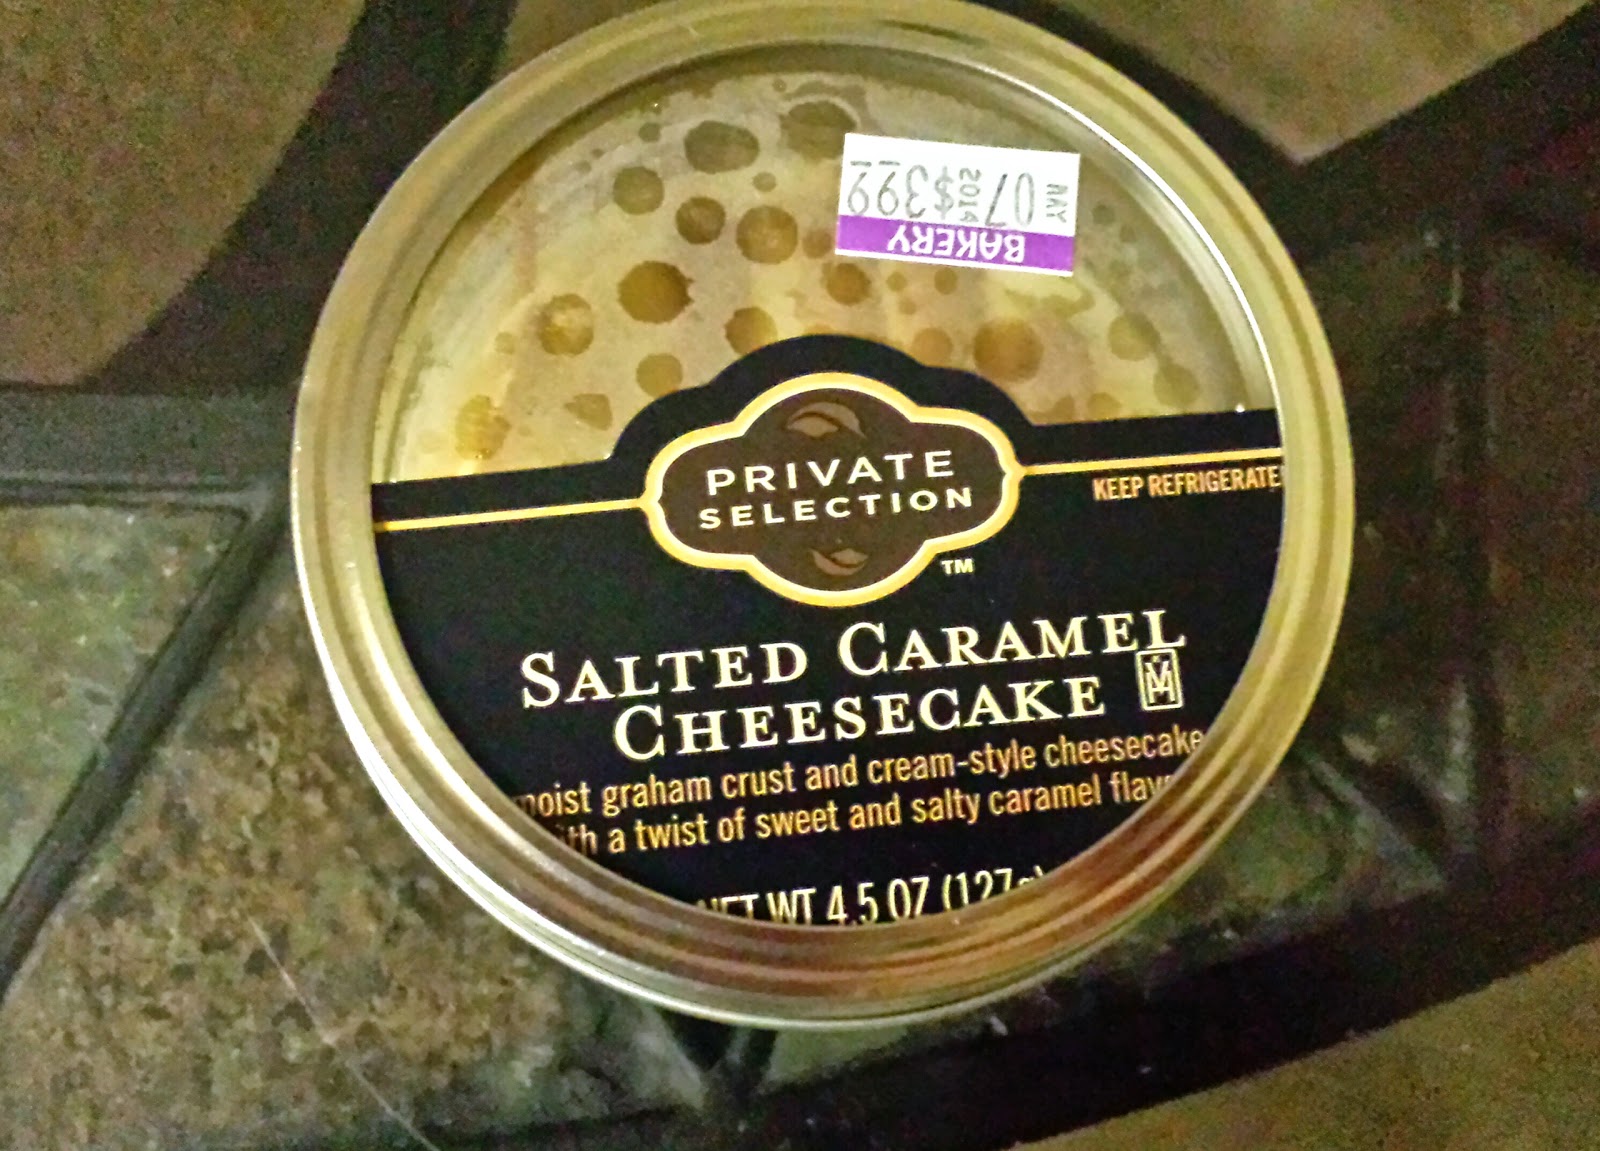 Kroger's Private Selection Mason Jar Desserts Review- Salted Caramel Cheesecake via ProductReviewMom.com